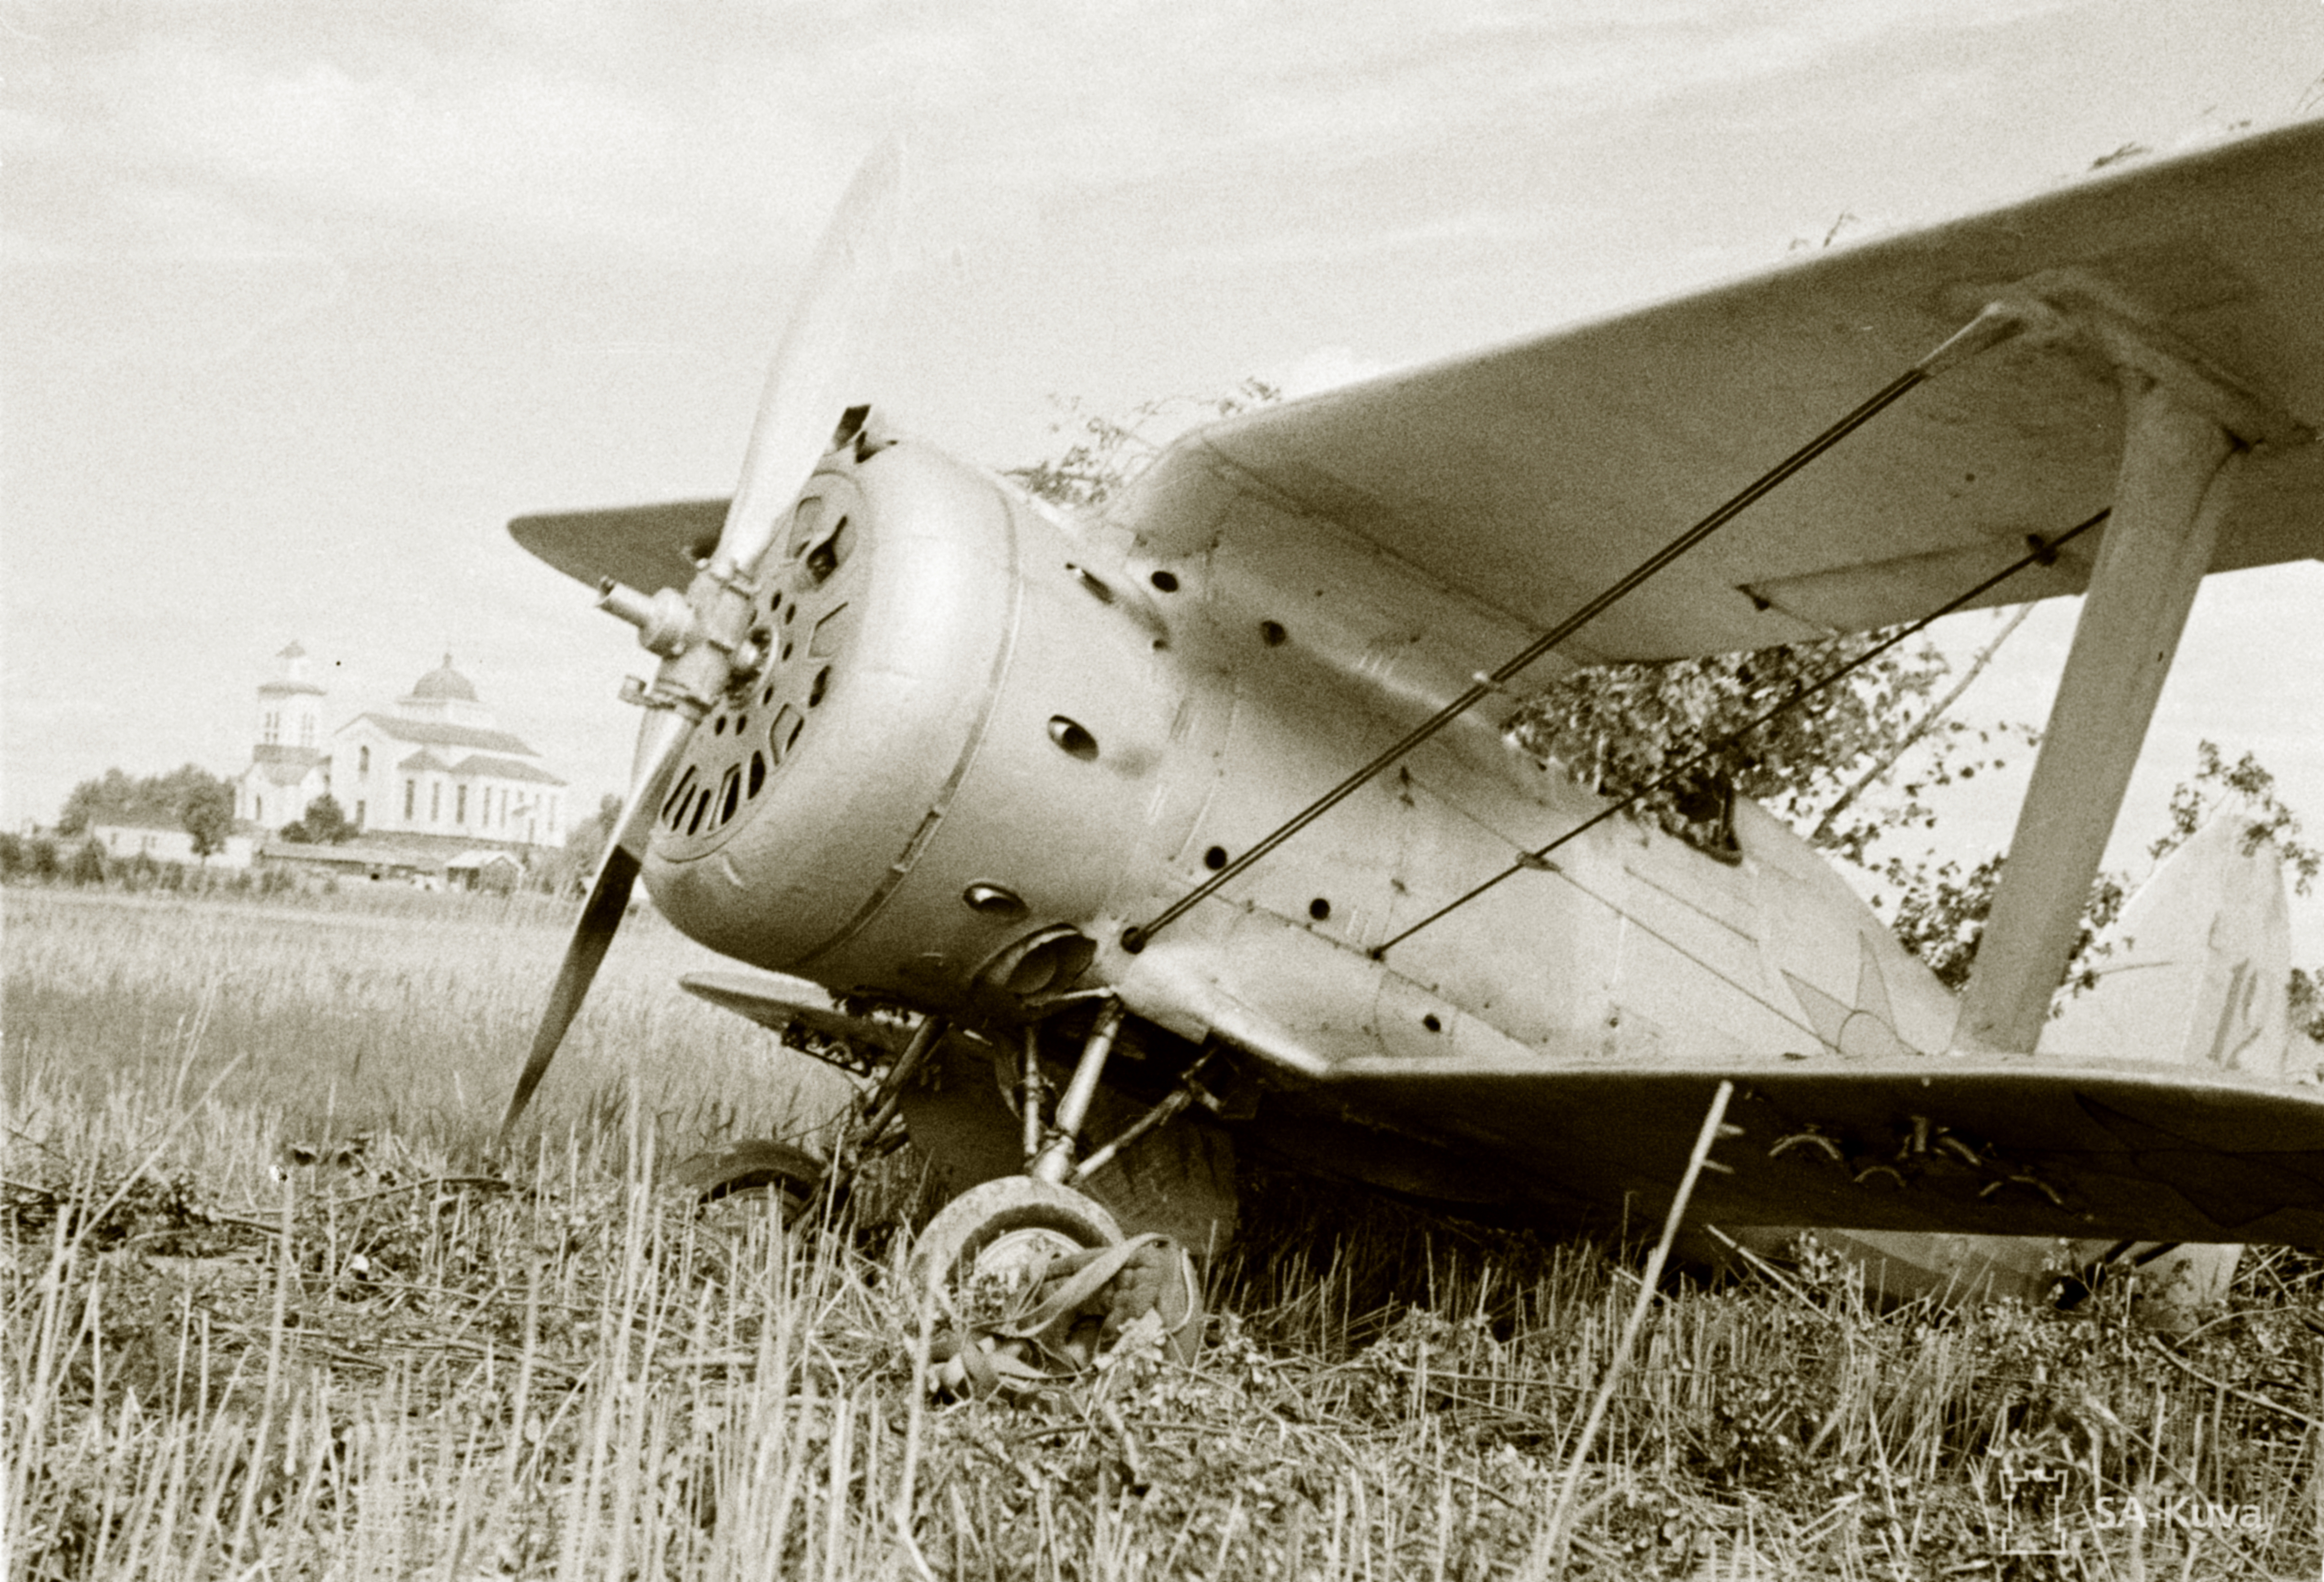 Finnish captured Polikarpov I 153 153IAP Black 12 and used by the FAF as VH101 25th Jun 1941 20615